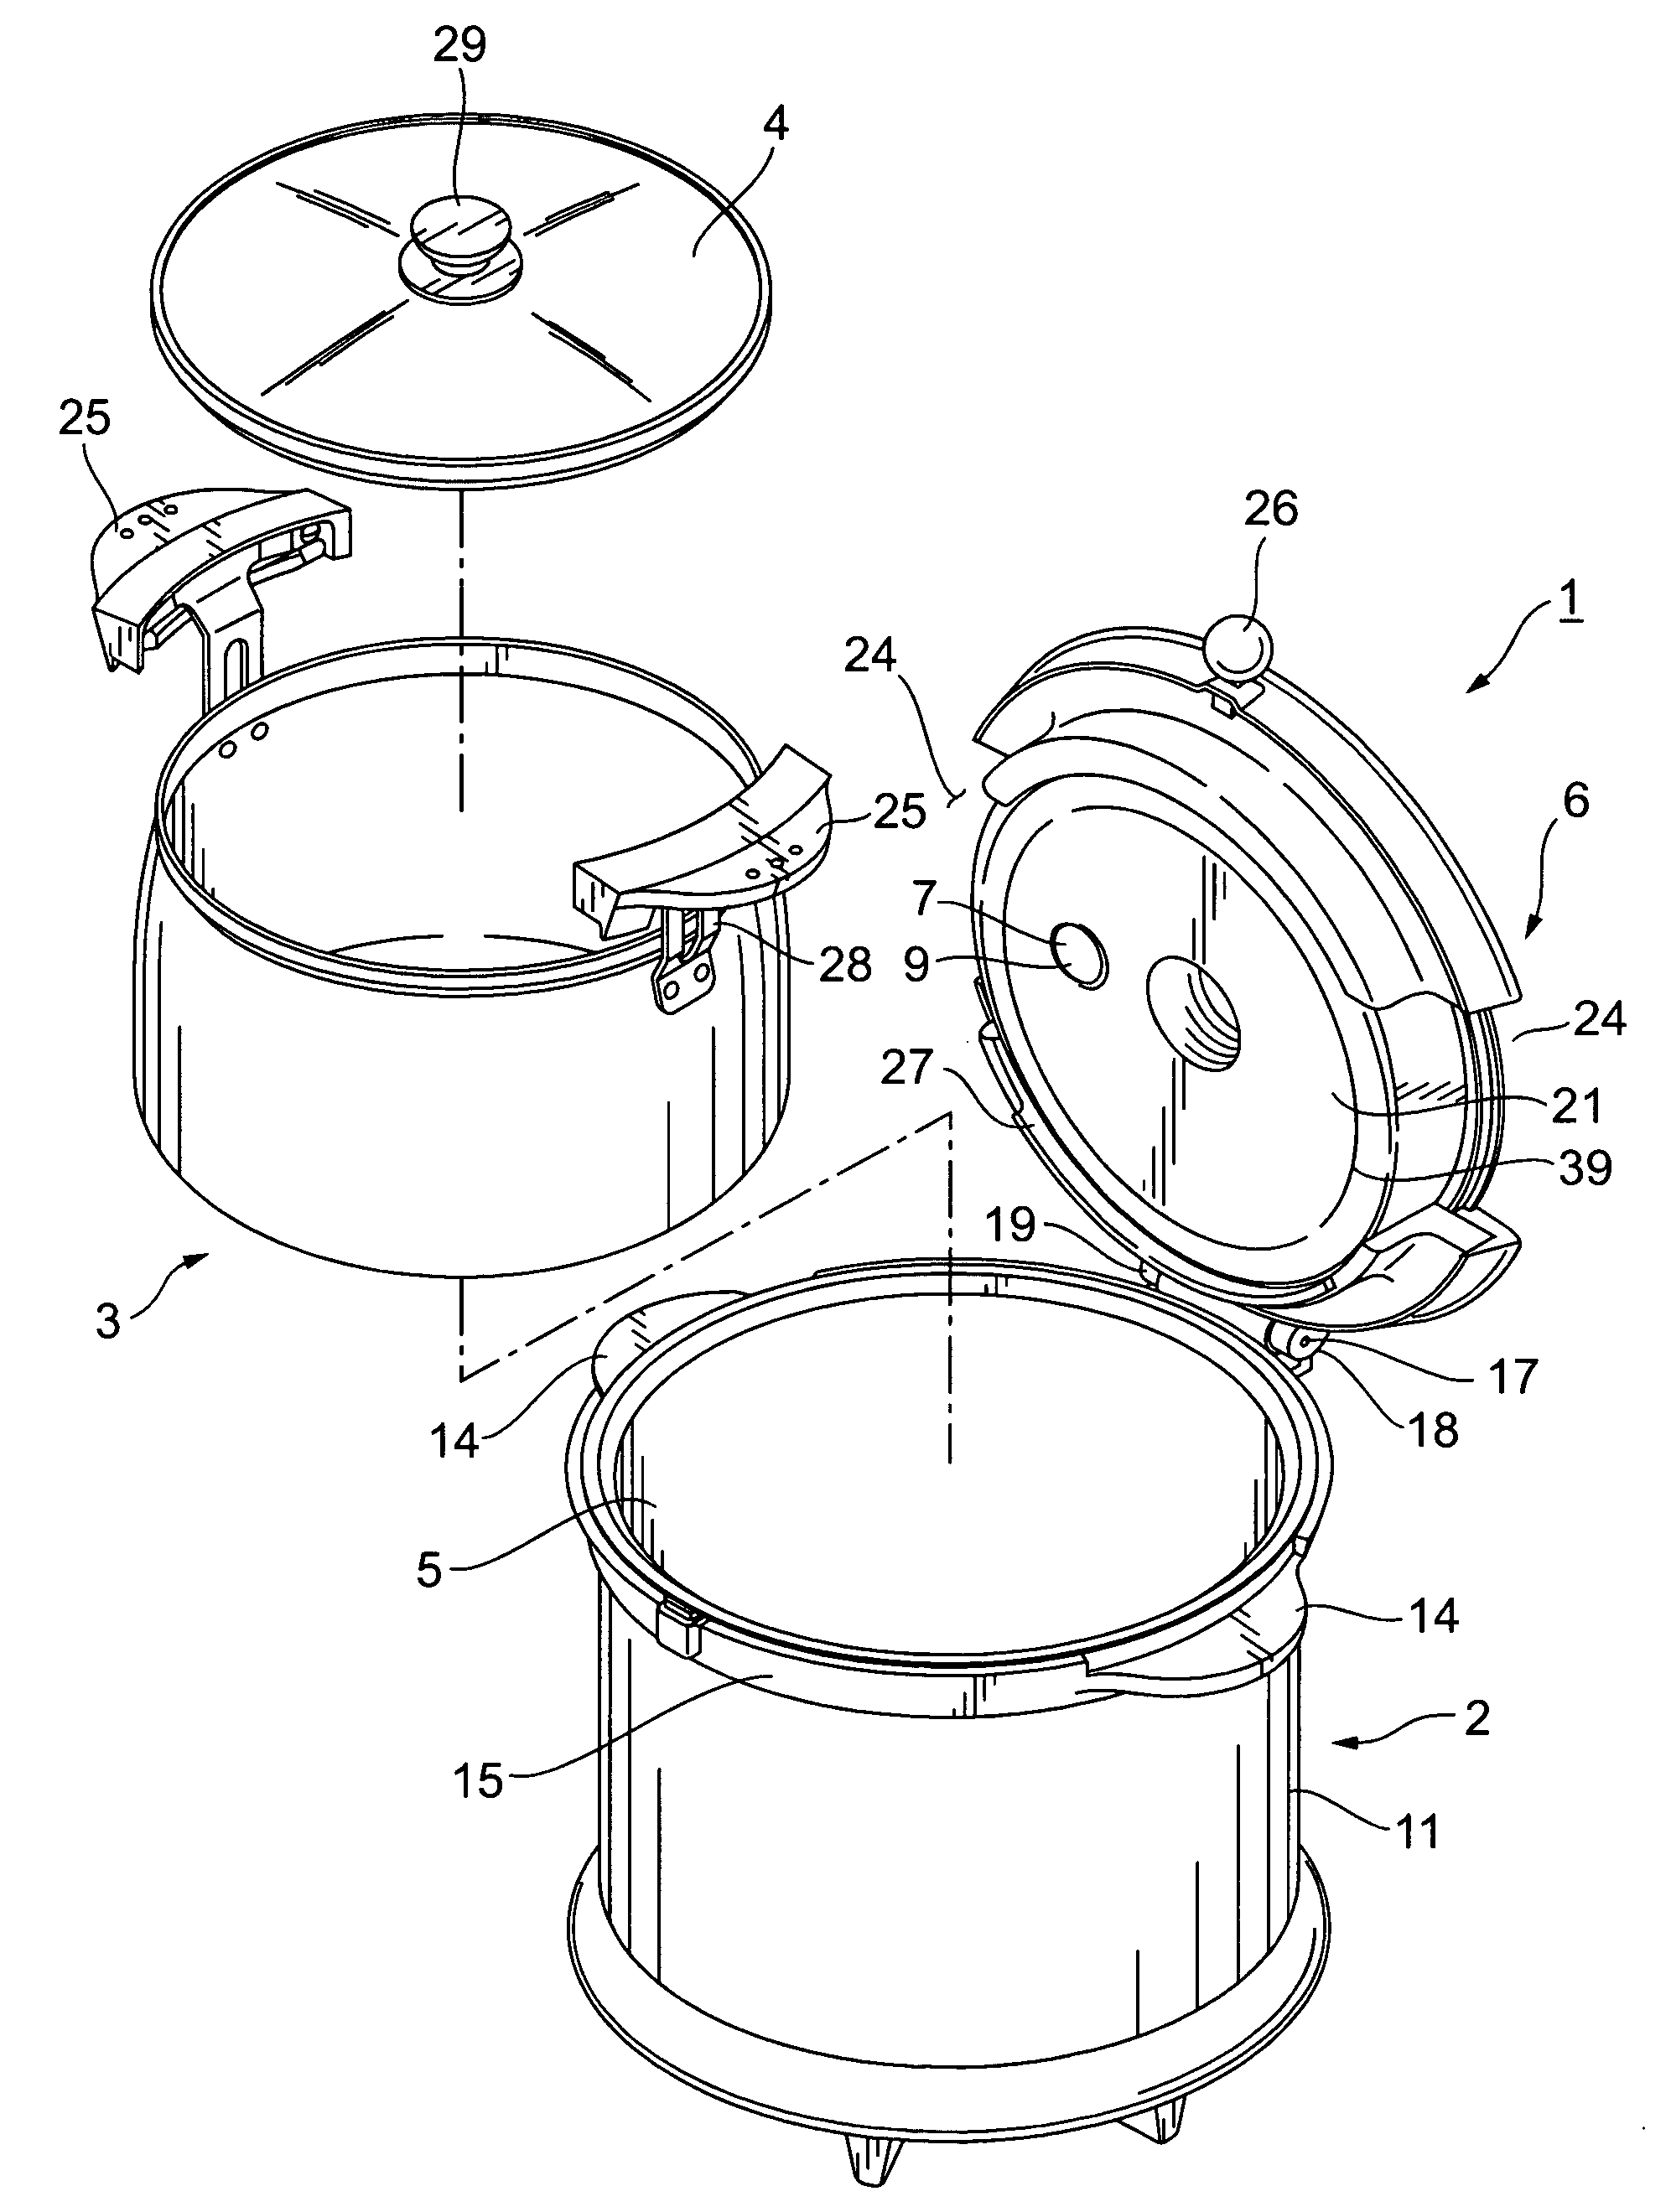 Heat-insulating cooking container